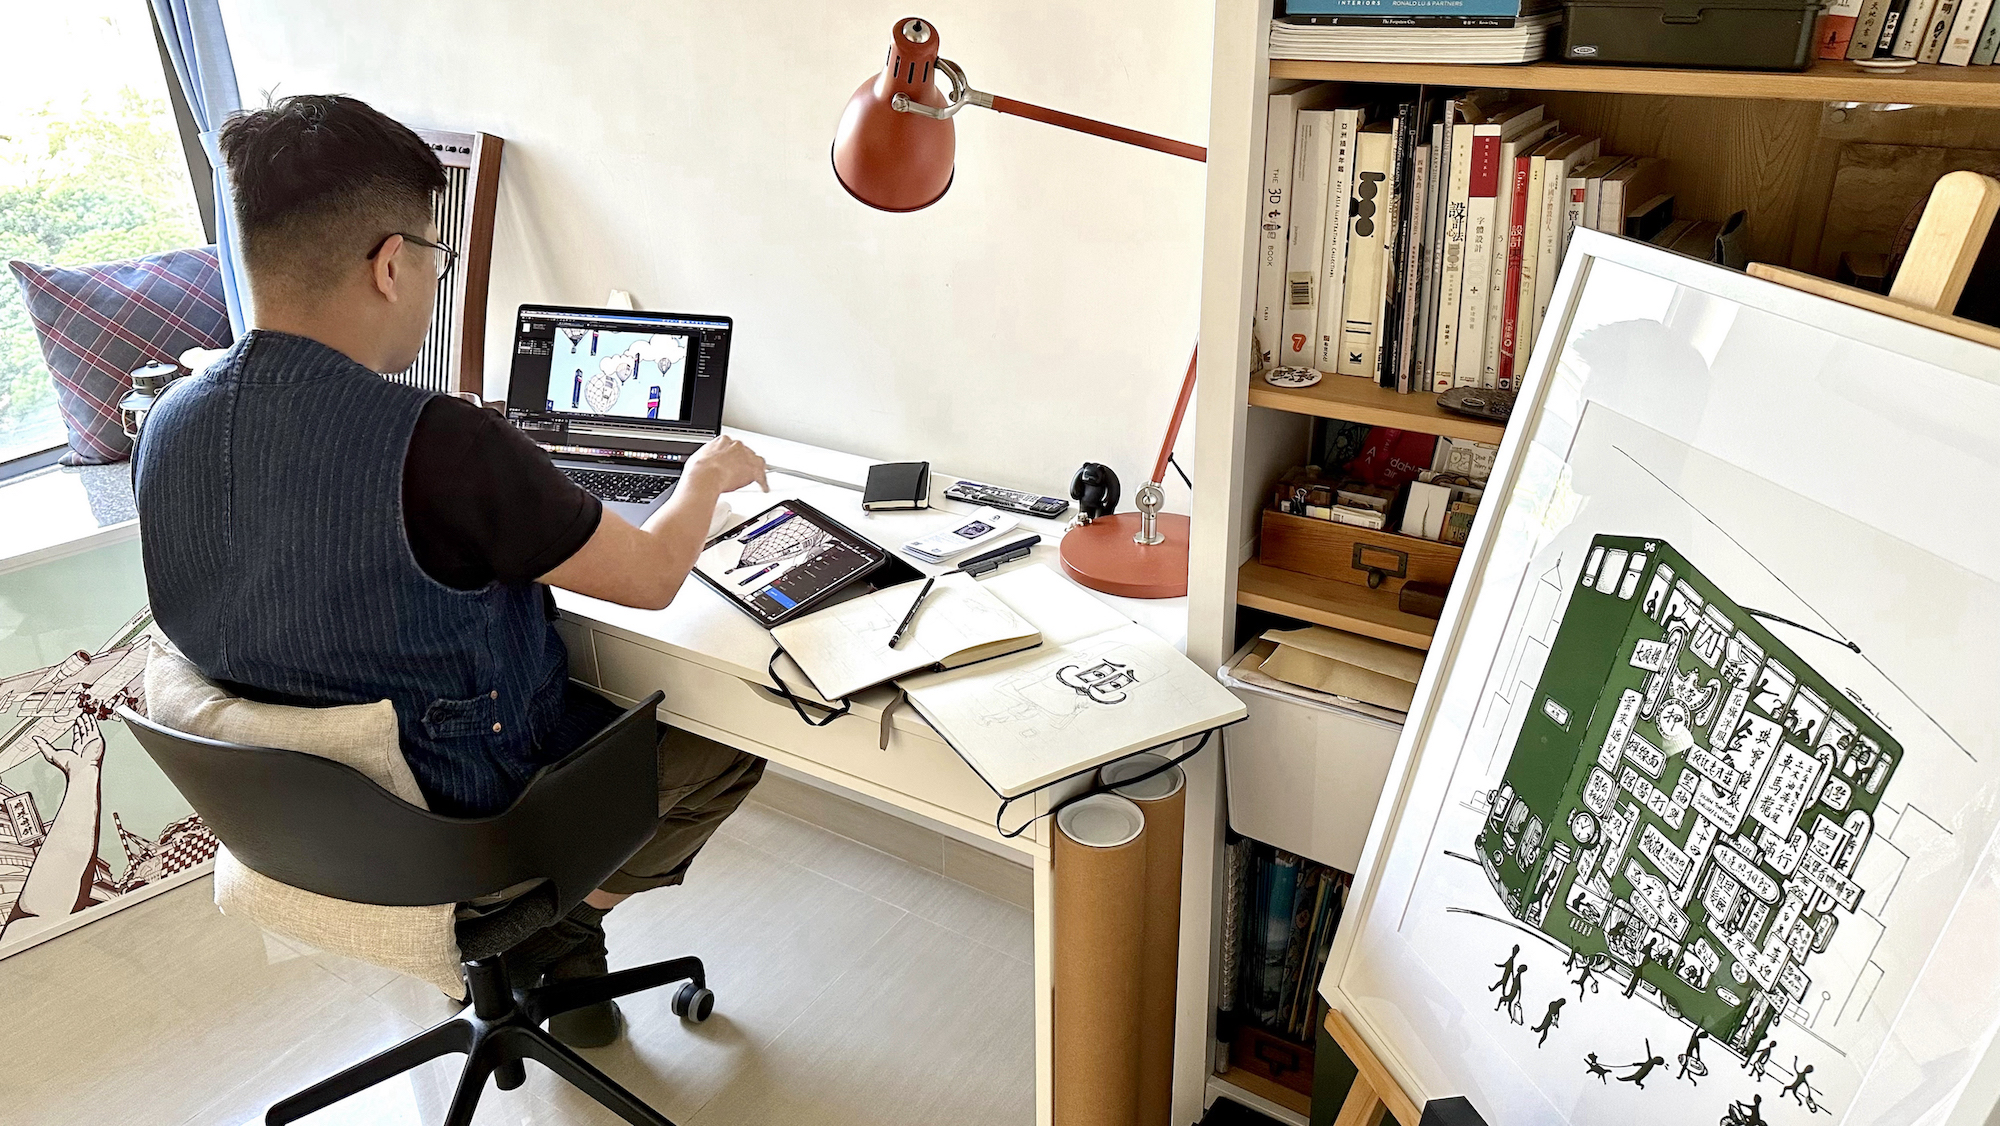 Rick Lo working on his artwork using two tablets in his studio, showing a work of tram by Rick Lo by side